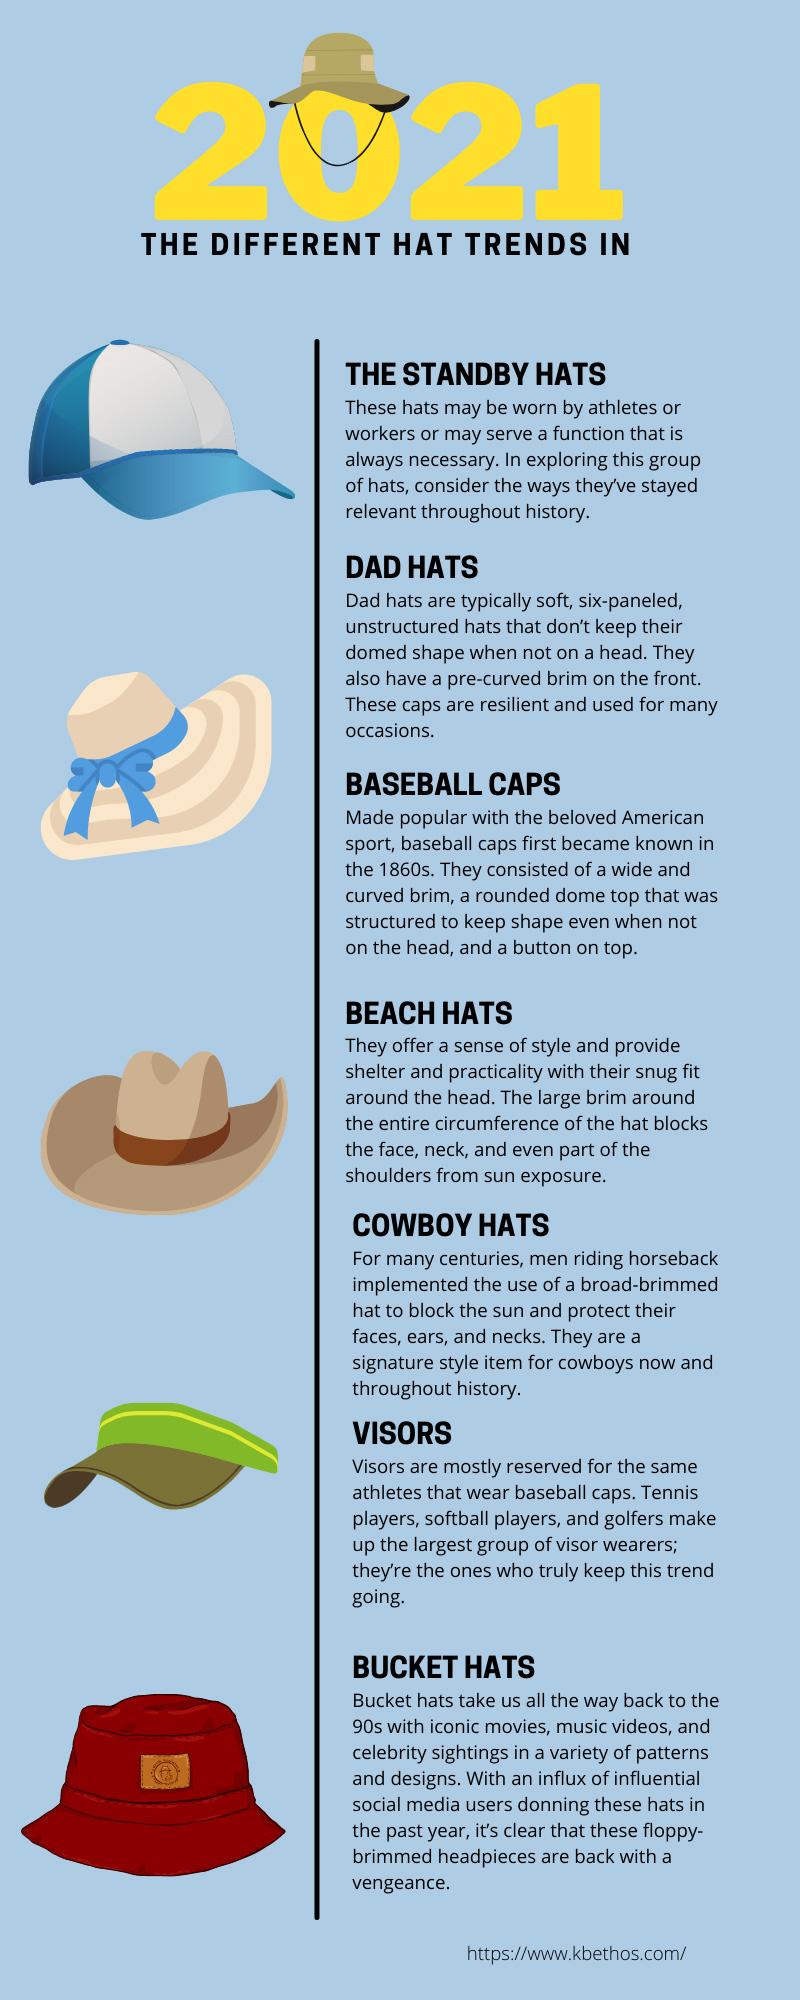 The Different Hat Trends in 2021